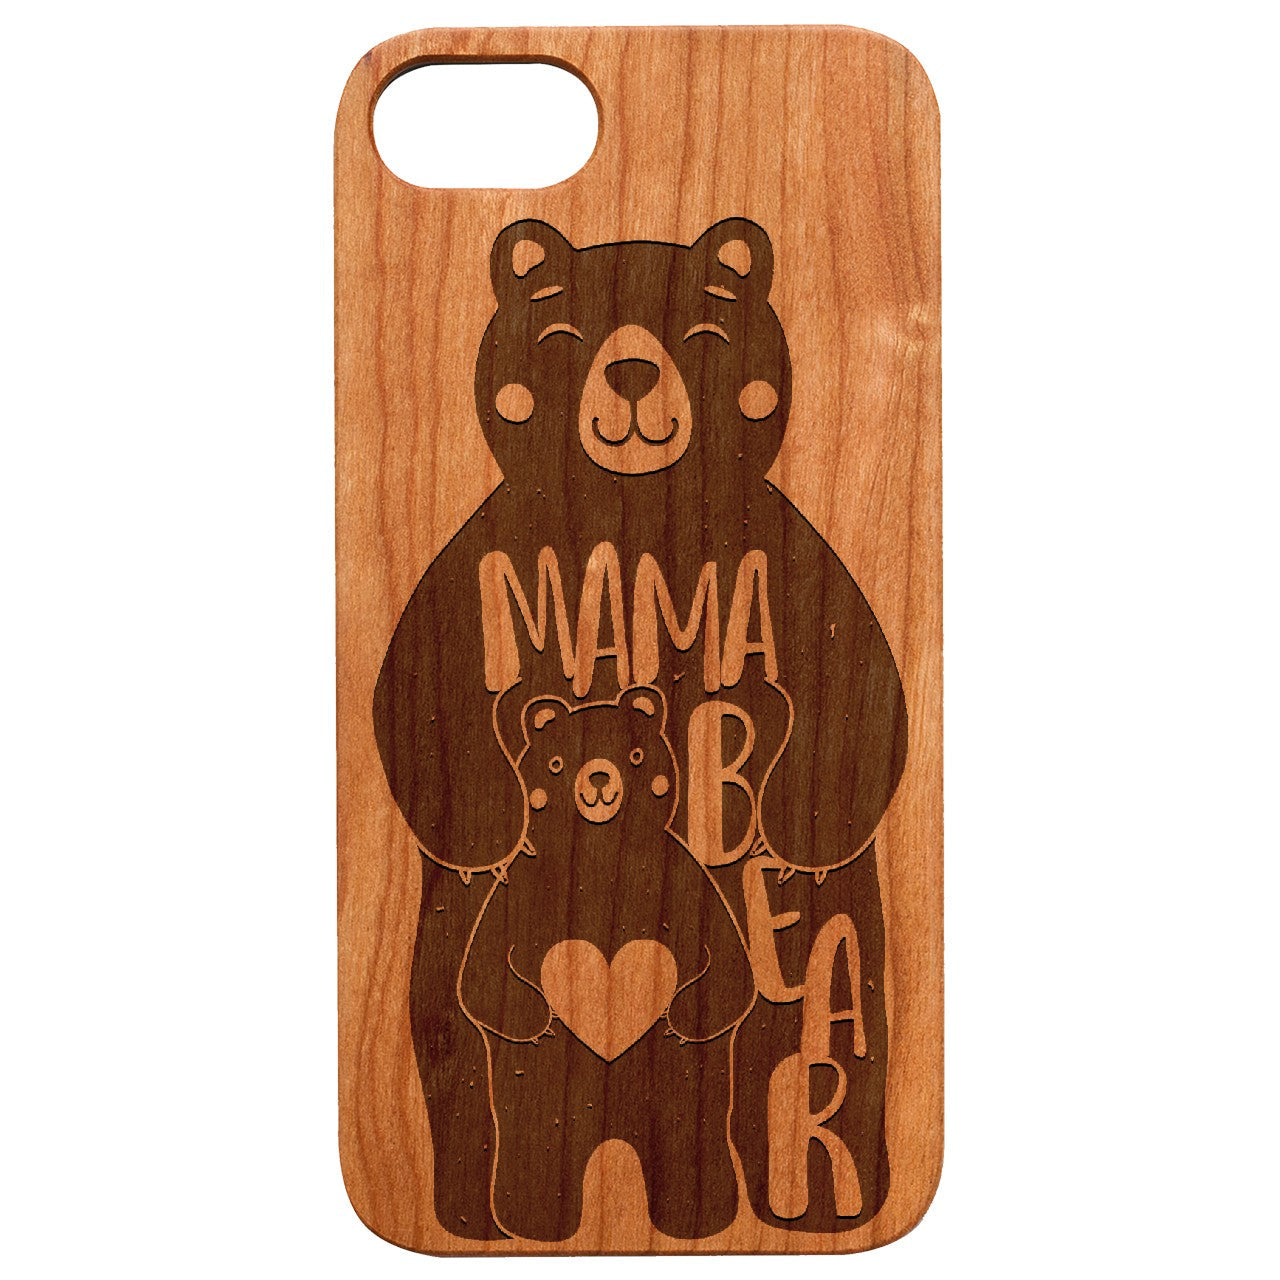  Mama Bear - Engraved - Wooden Phone Case - IPhone 13 Models